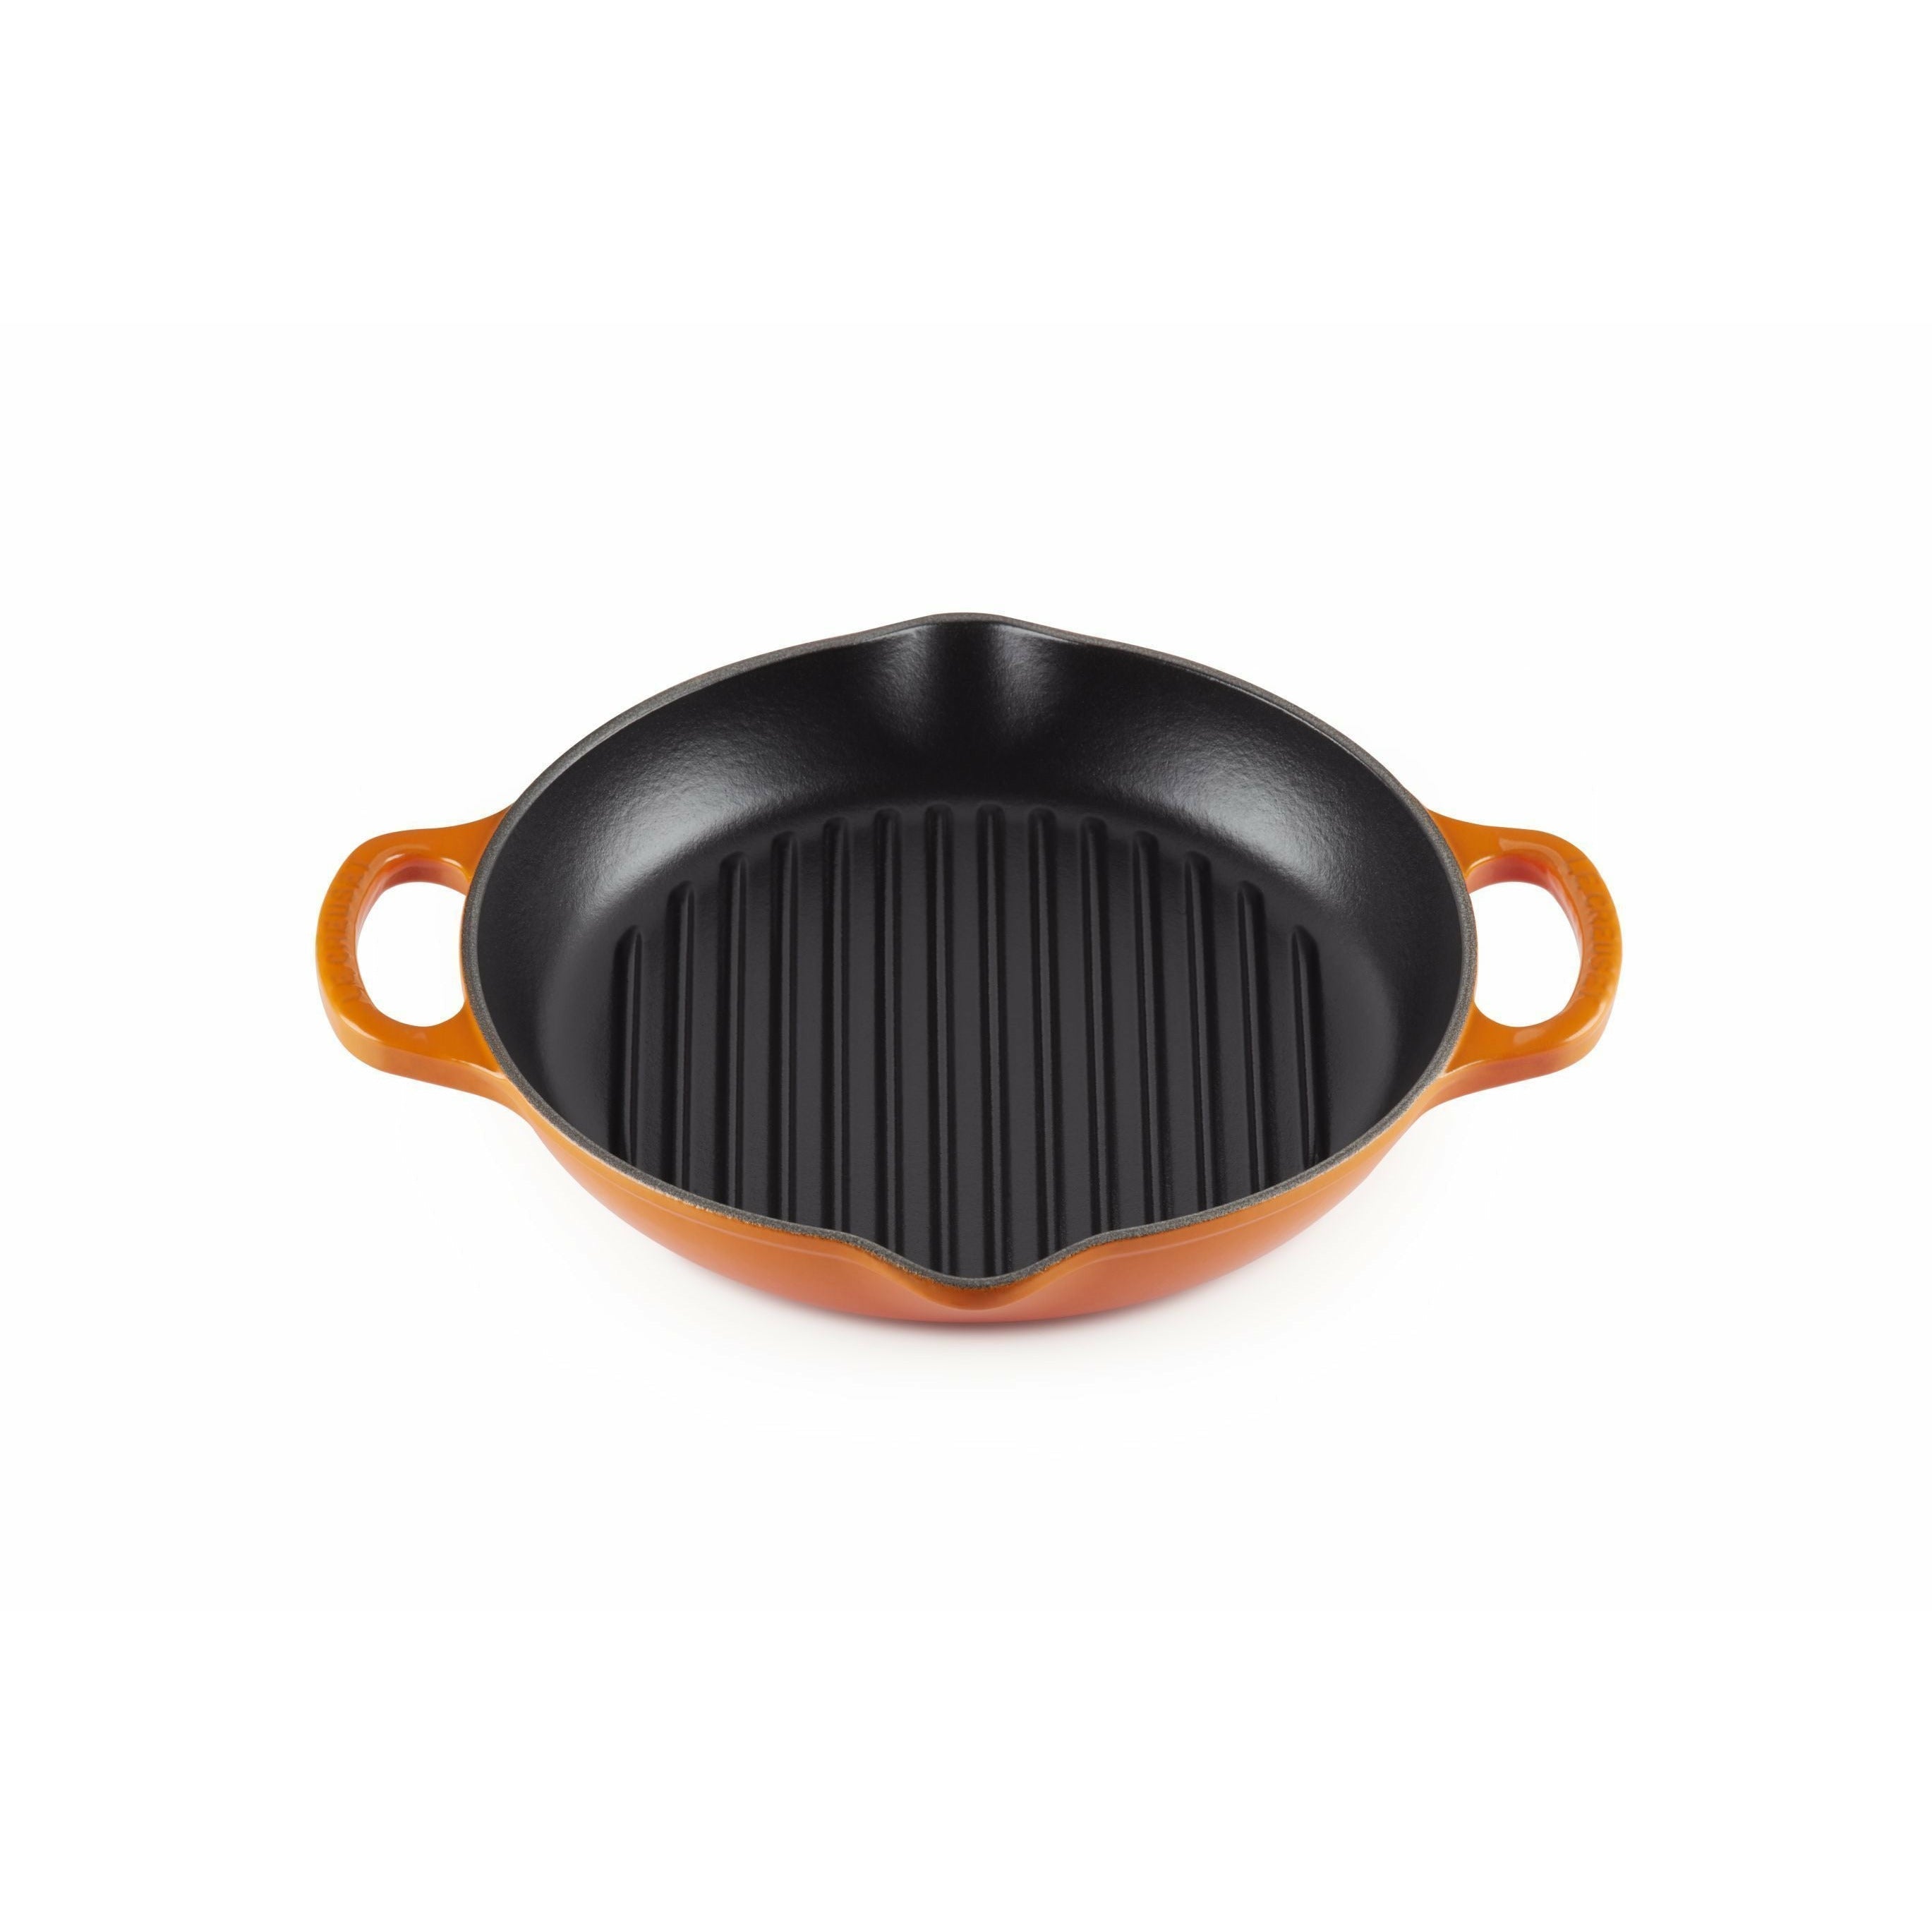 Le Creuset Nature High Round Grill Pan 25 cm, rosso forno